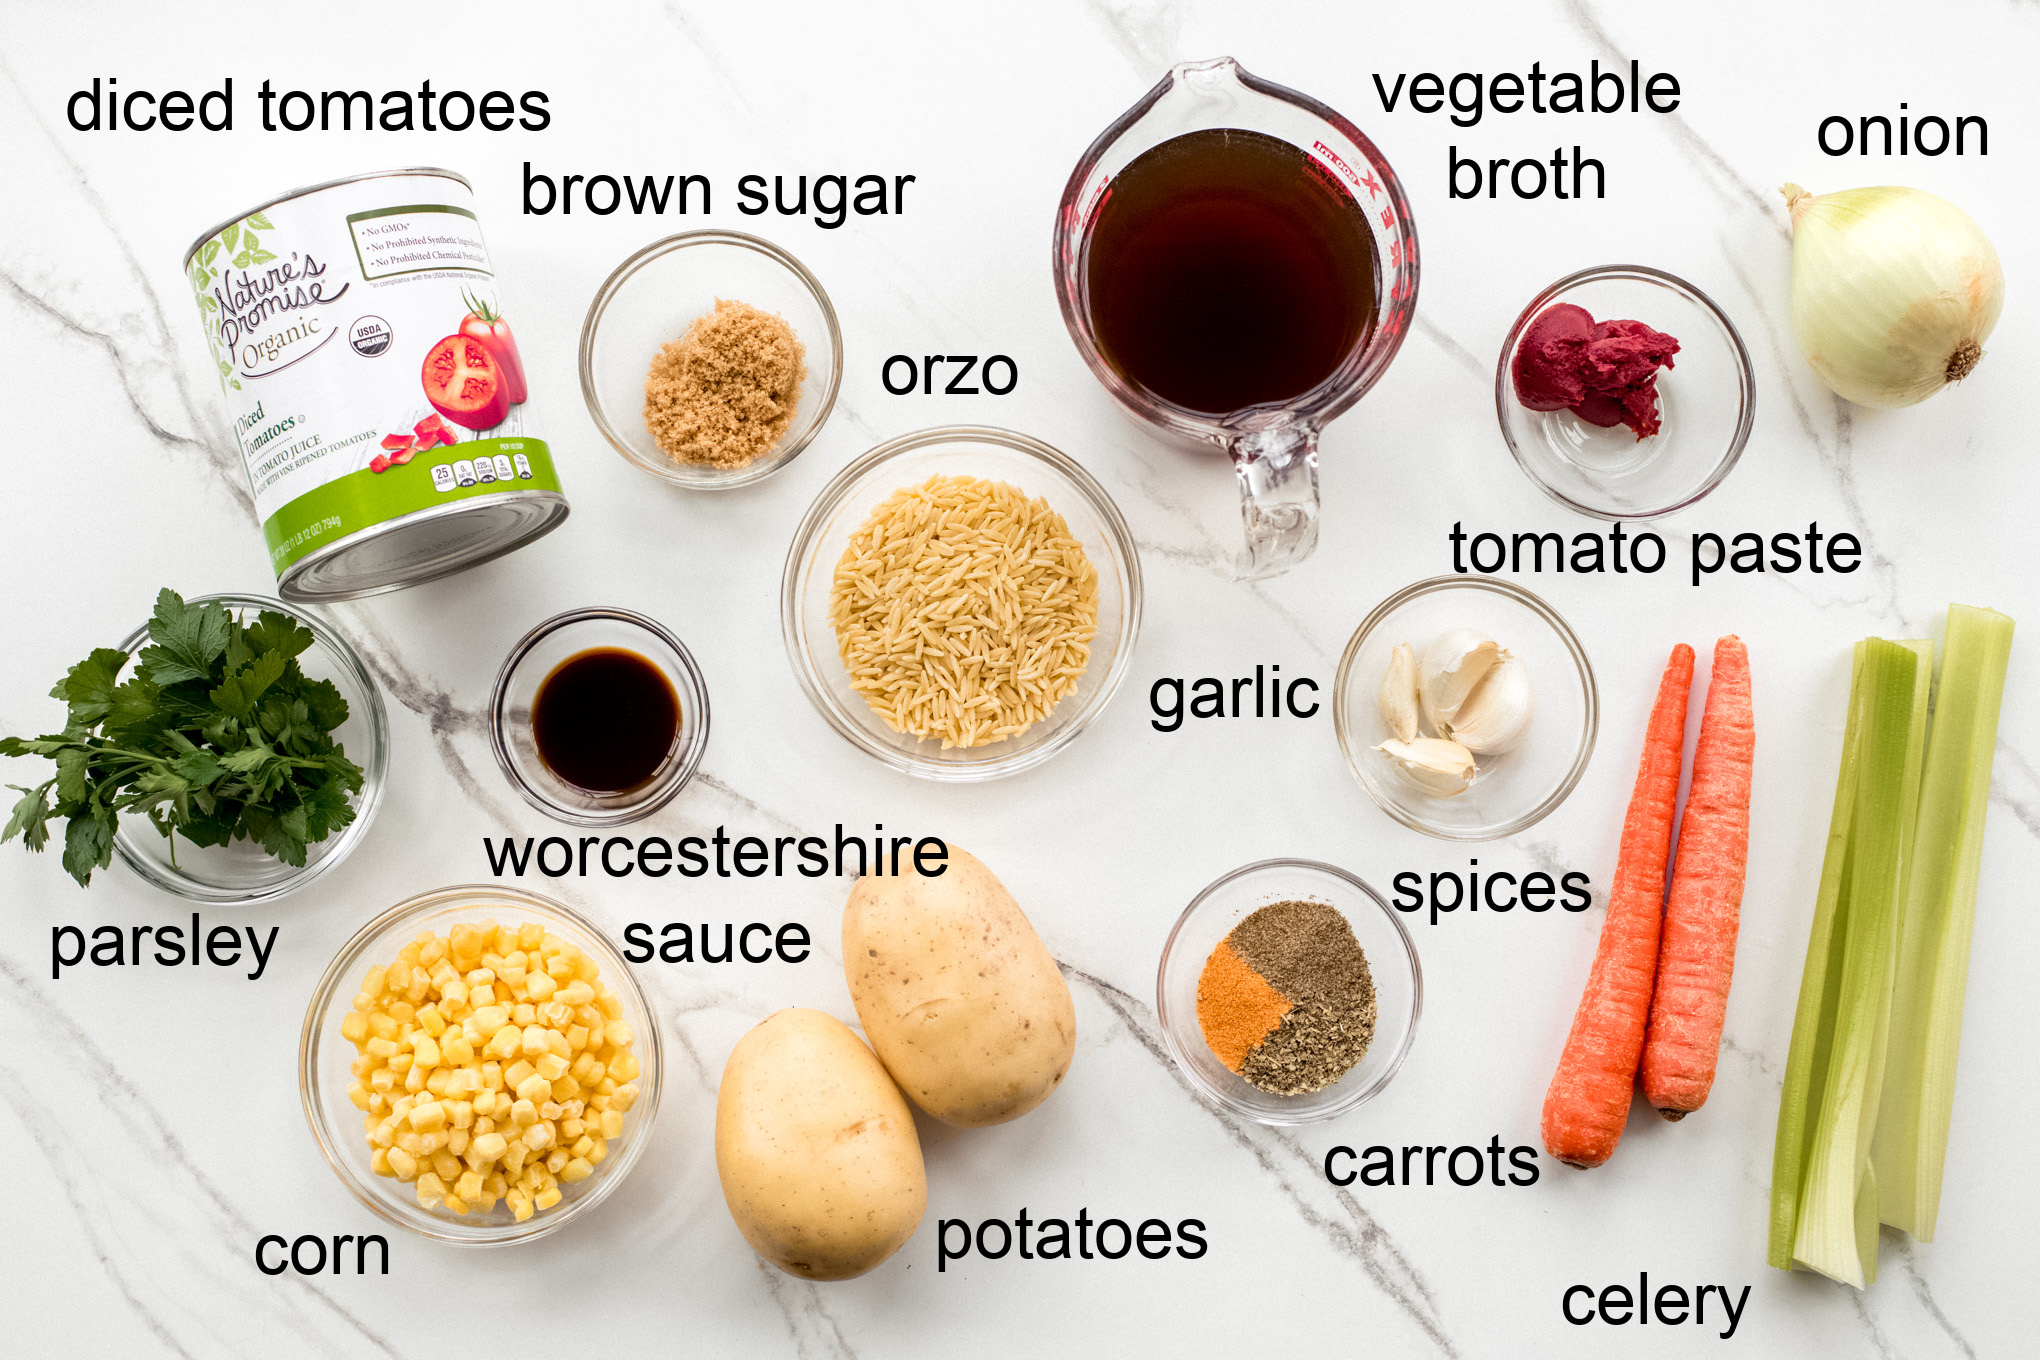 ingredients for vegetarian soup with orzo.